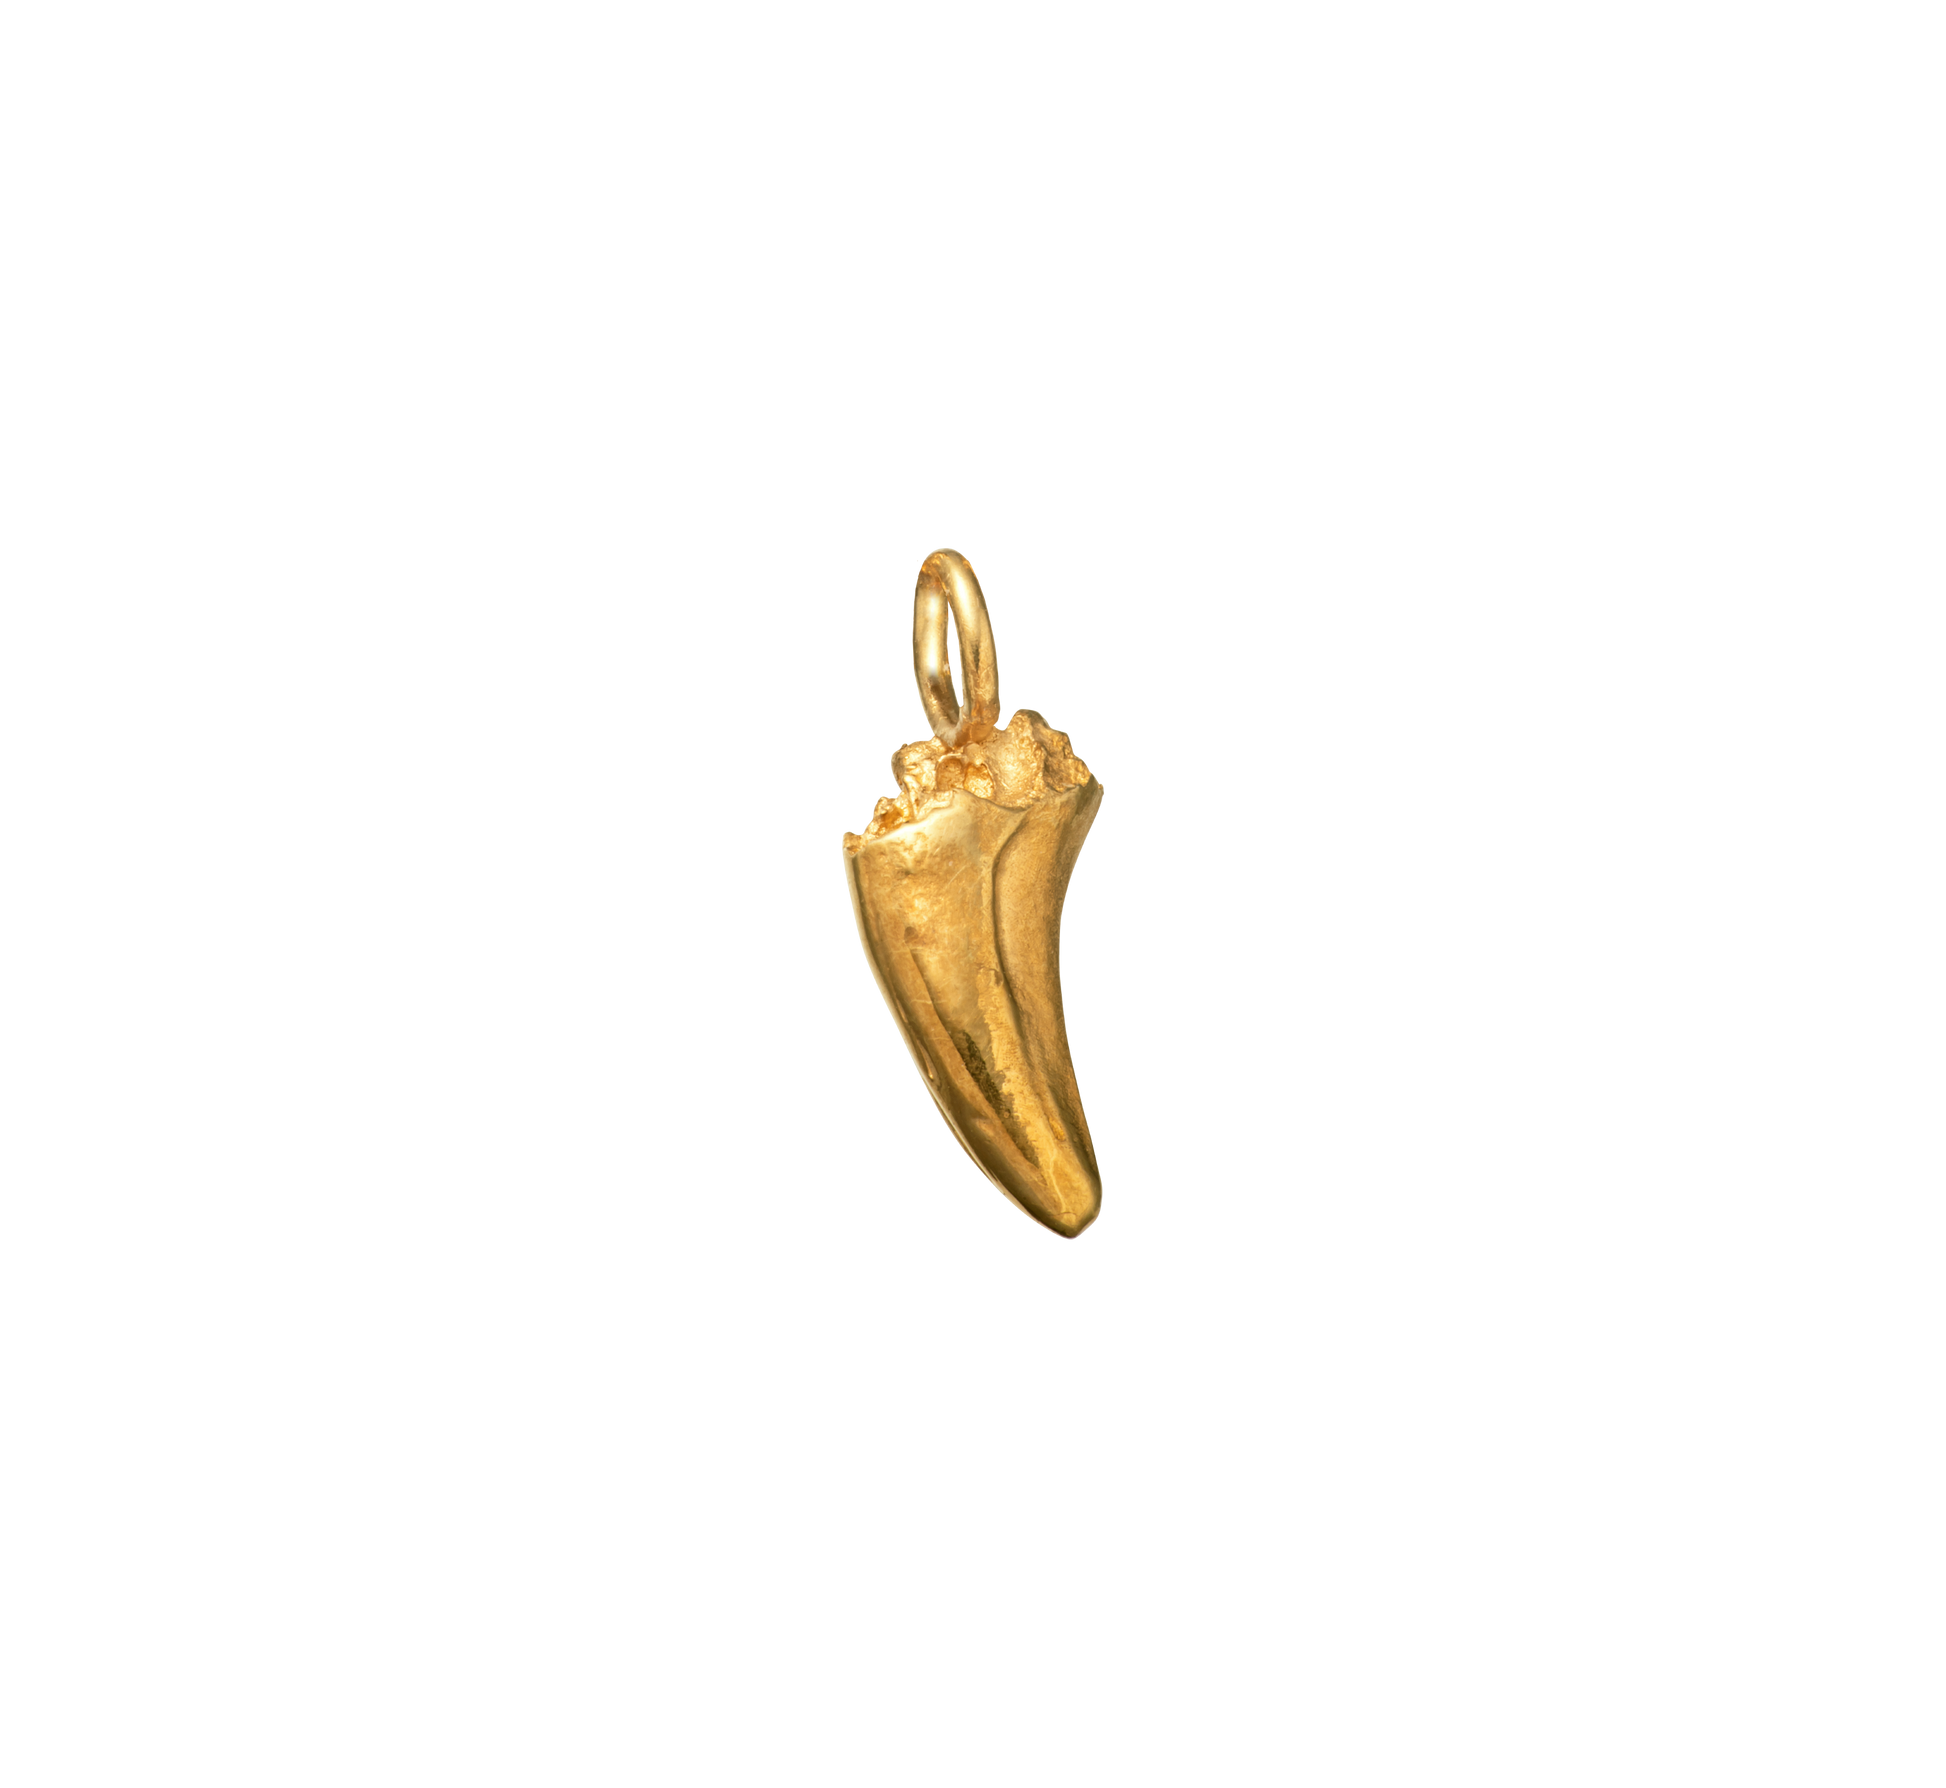 A delicate and small 18-karat gold pendant cast from a cats tooth using the lost wax casting technique.